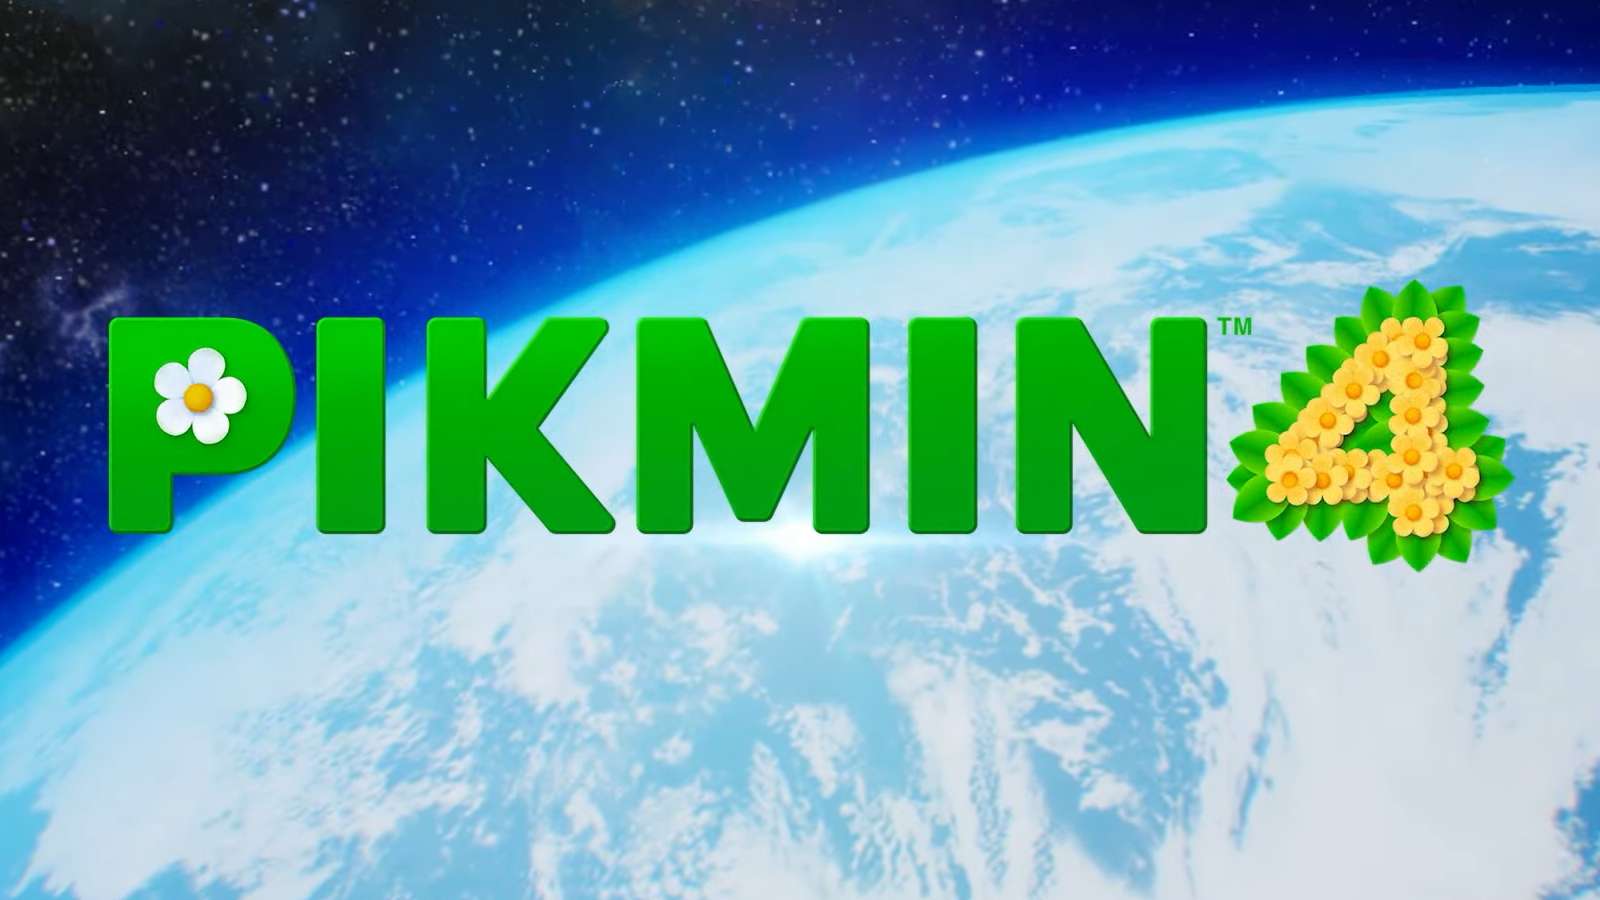 Pikmin 4 is the franchise's first mainline game since 2013.